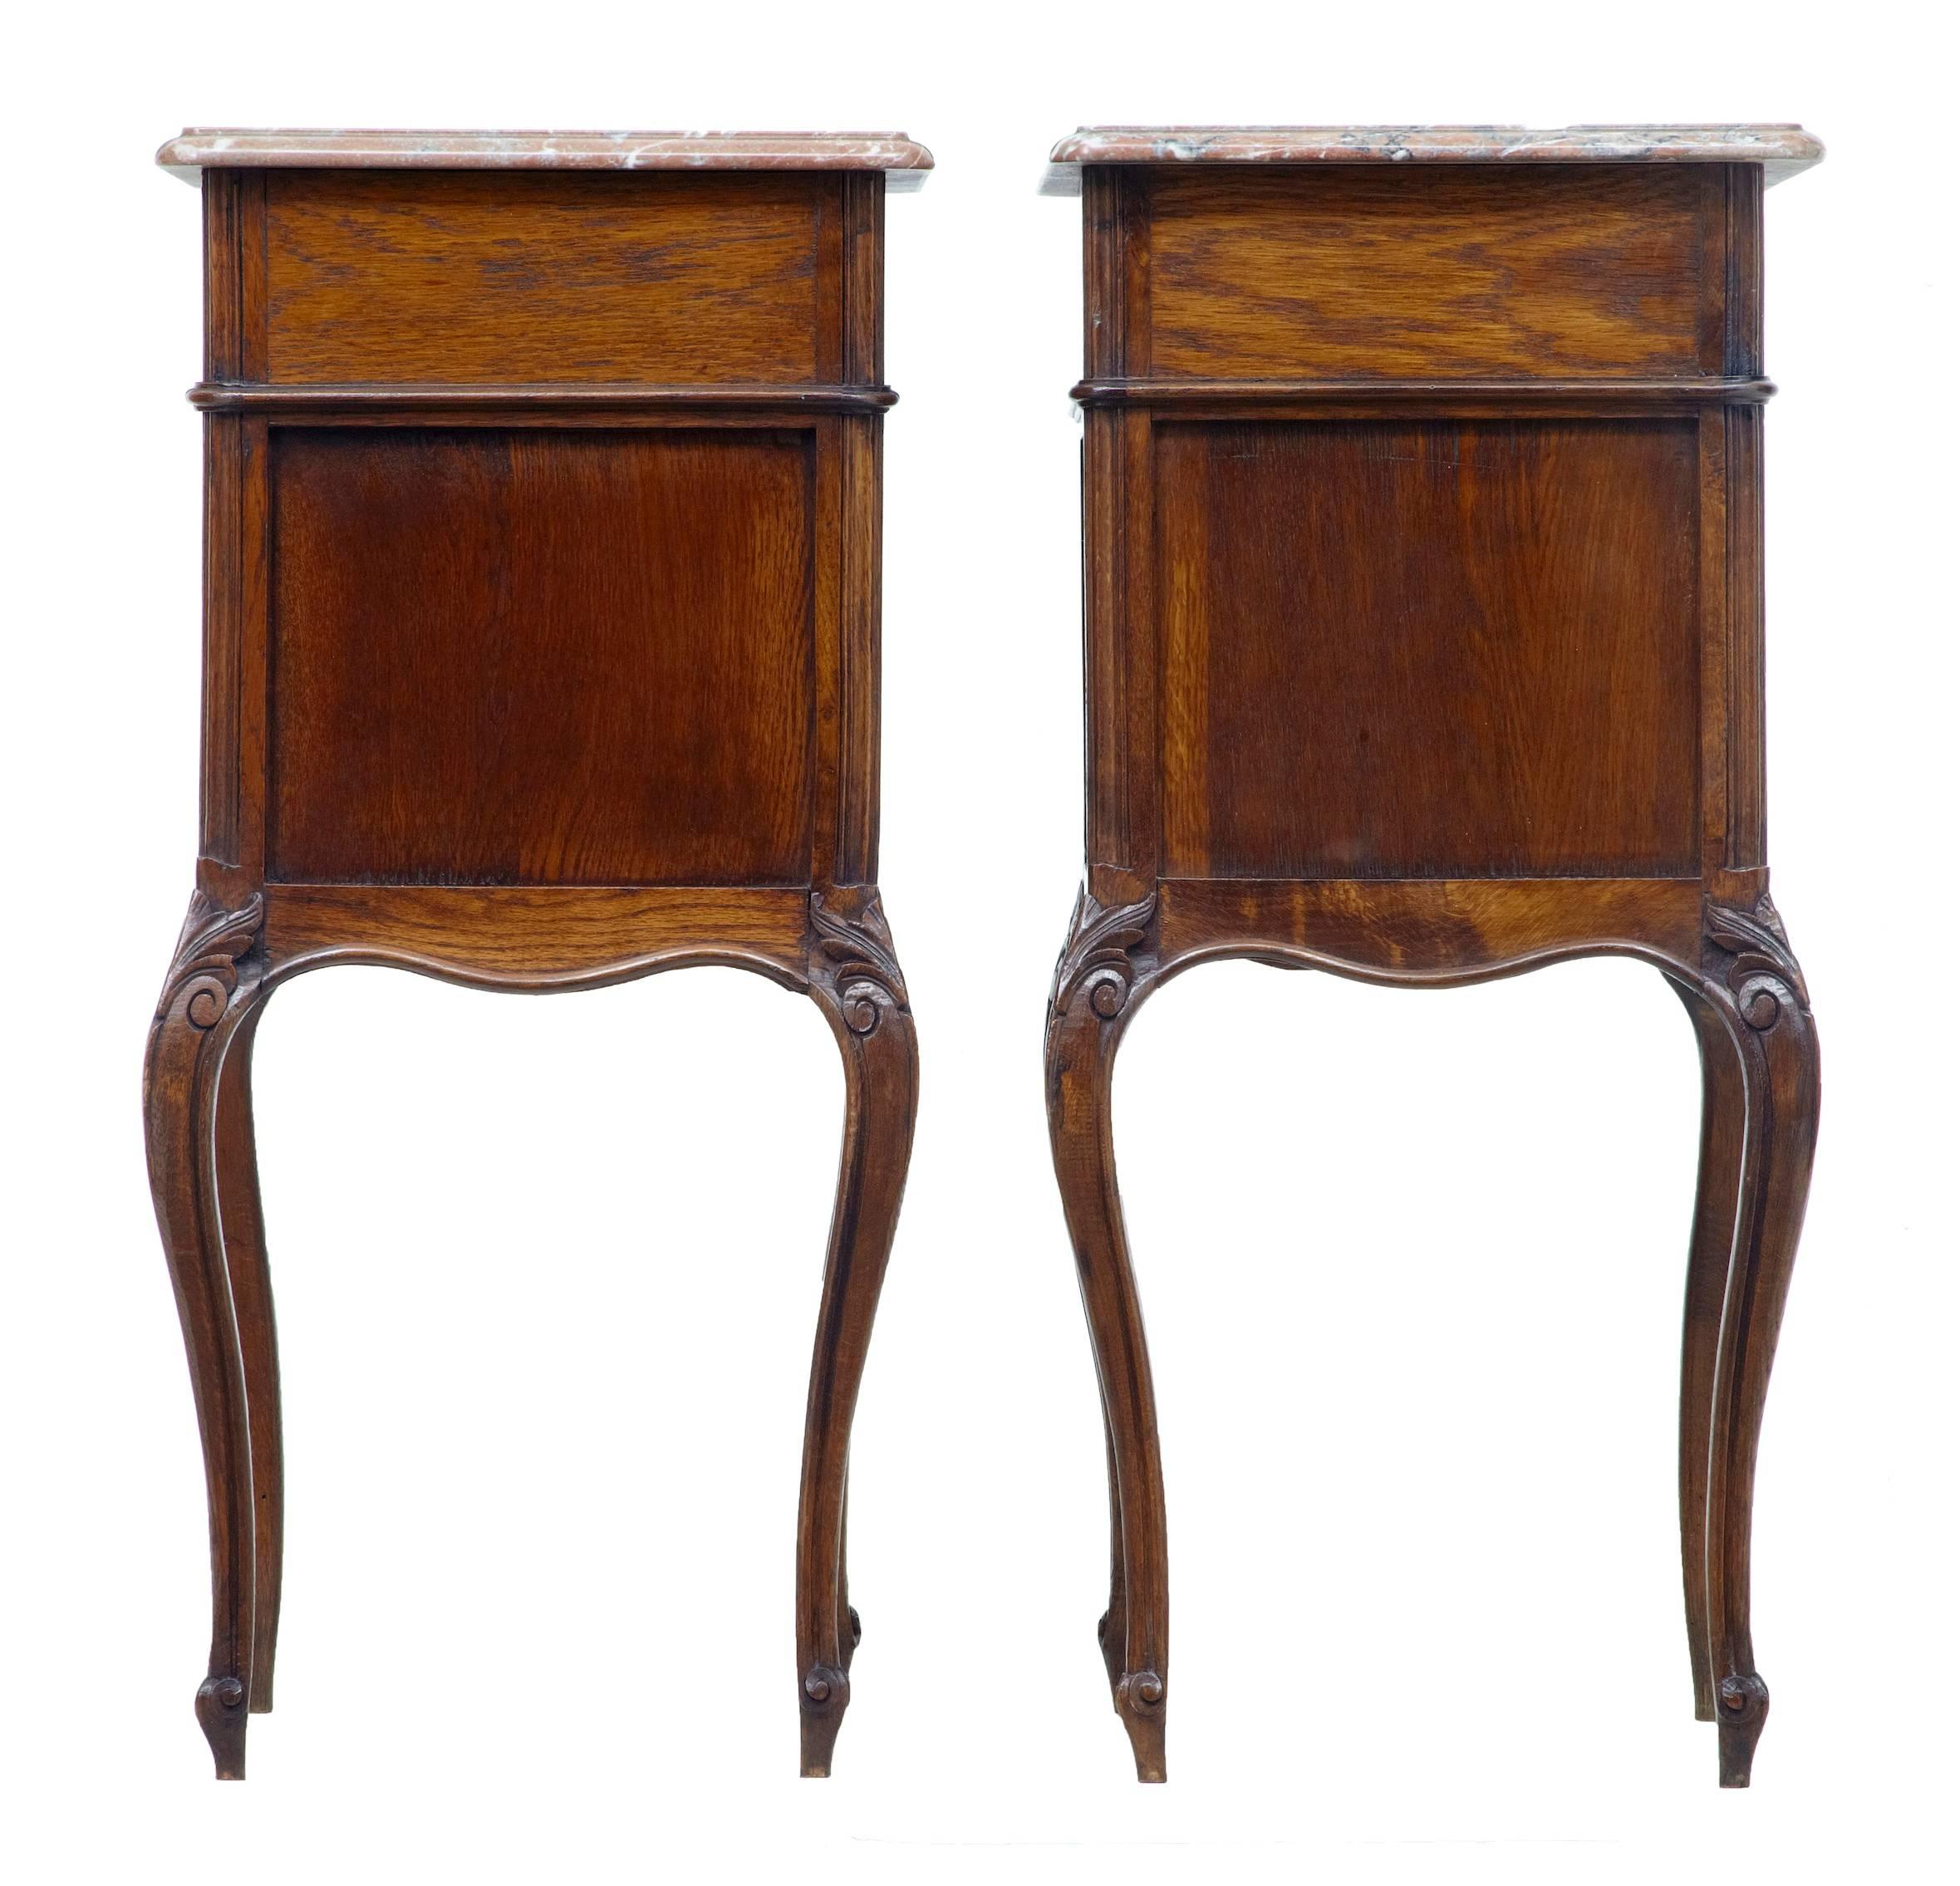 European Pair of 19th Century French Oak Marble-Top Nightstands